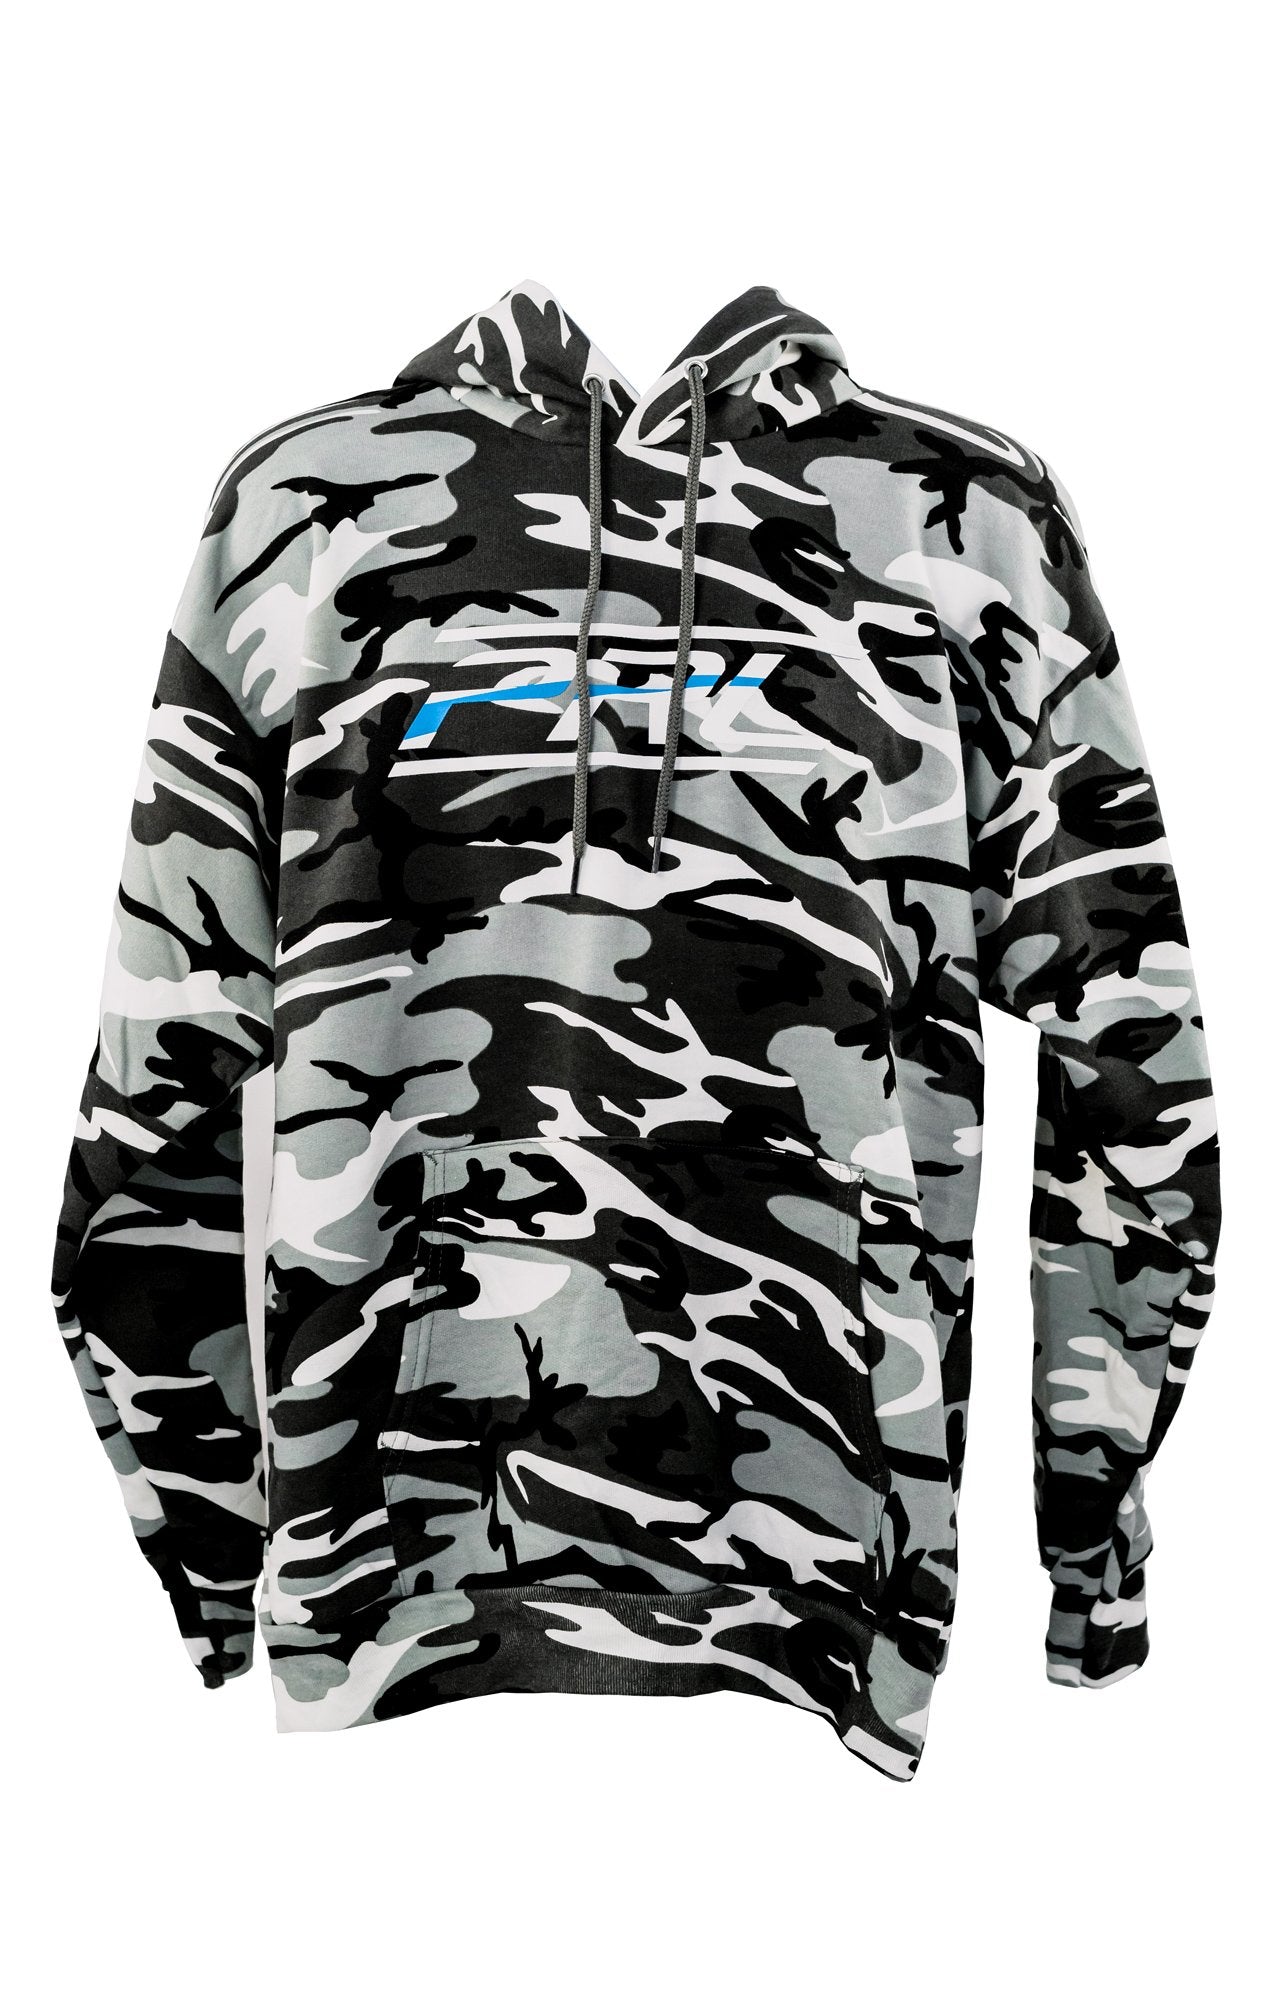 CLEARANCE: PRL Motorsports Camo Hoodie